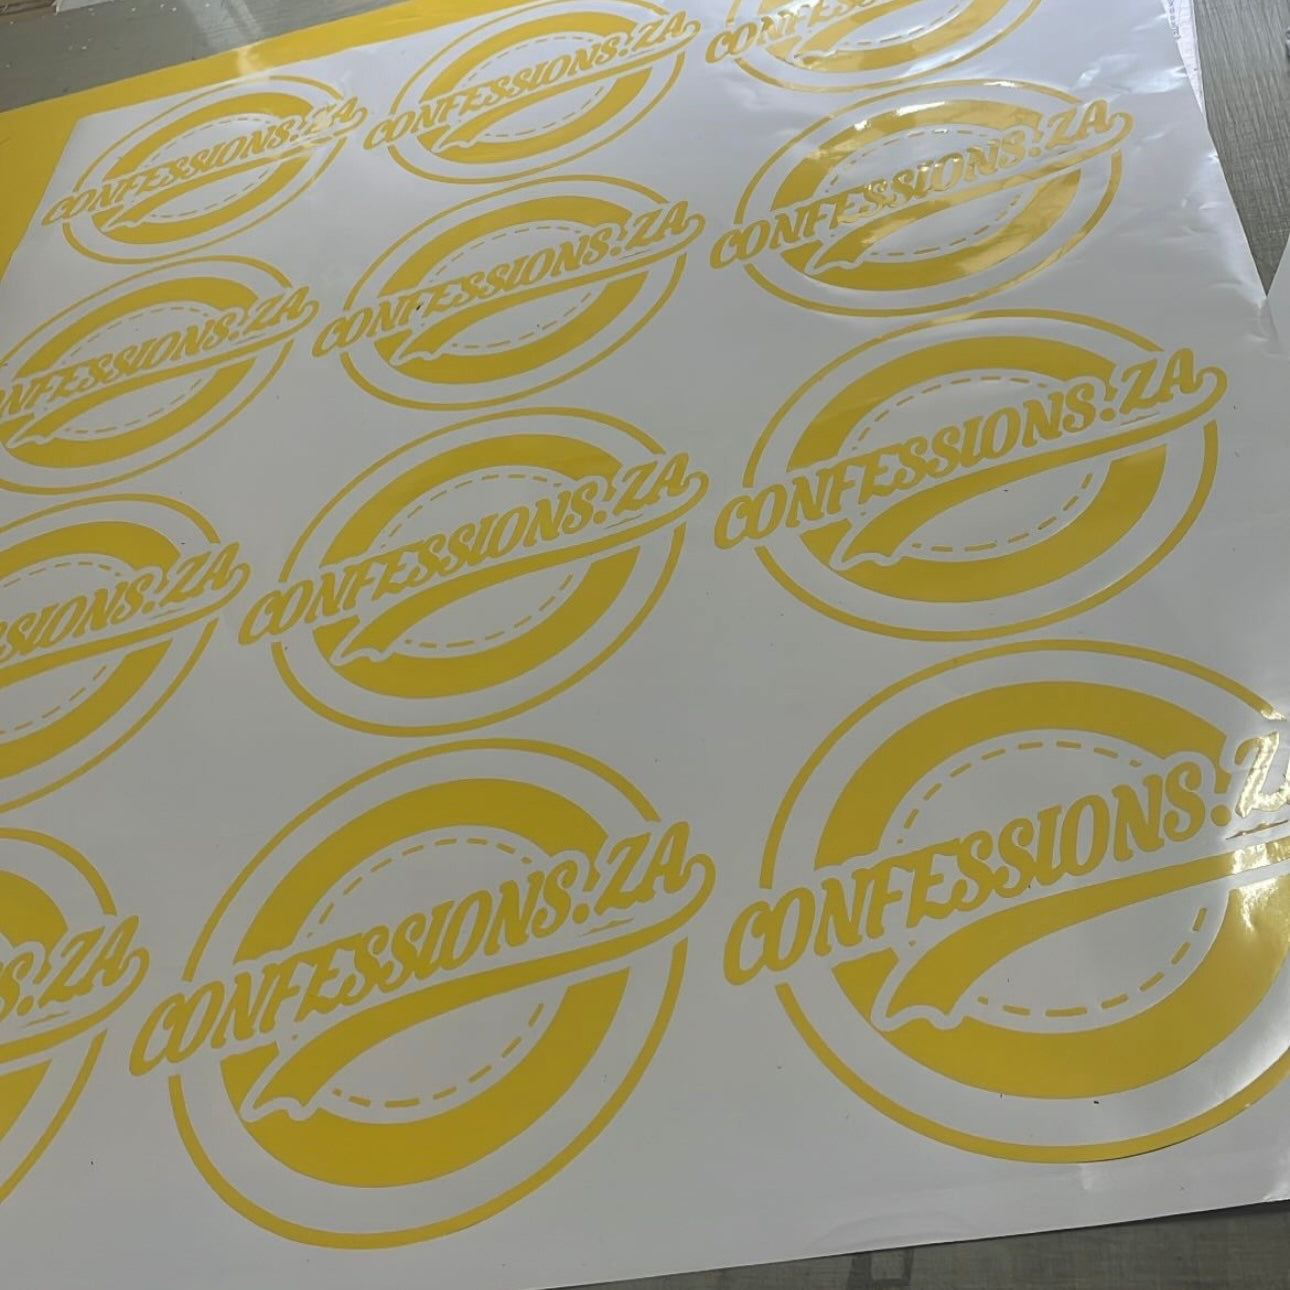 Confessions.za car decal - Pack of 2